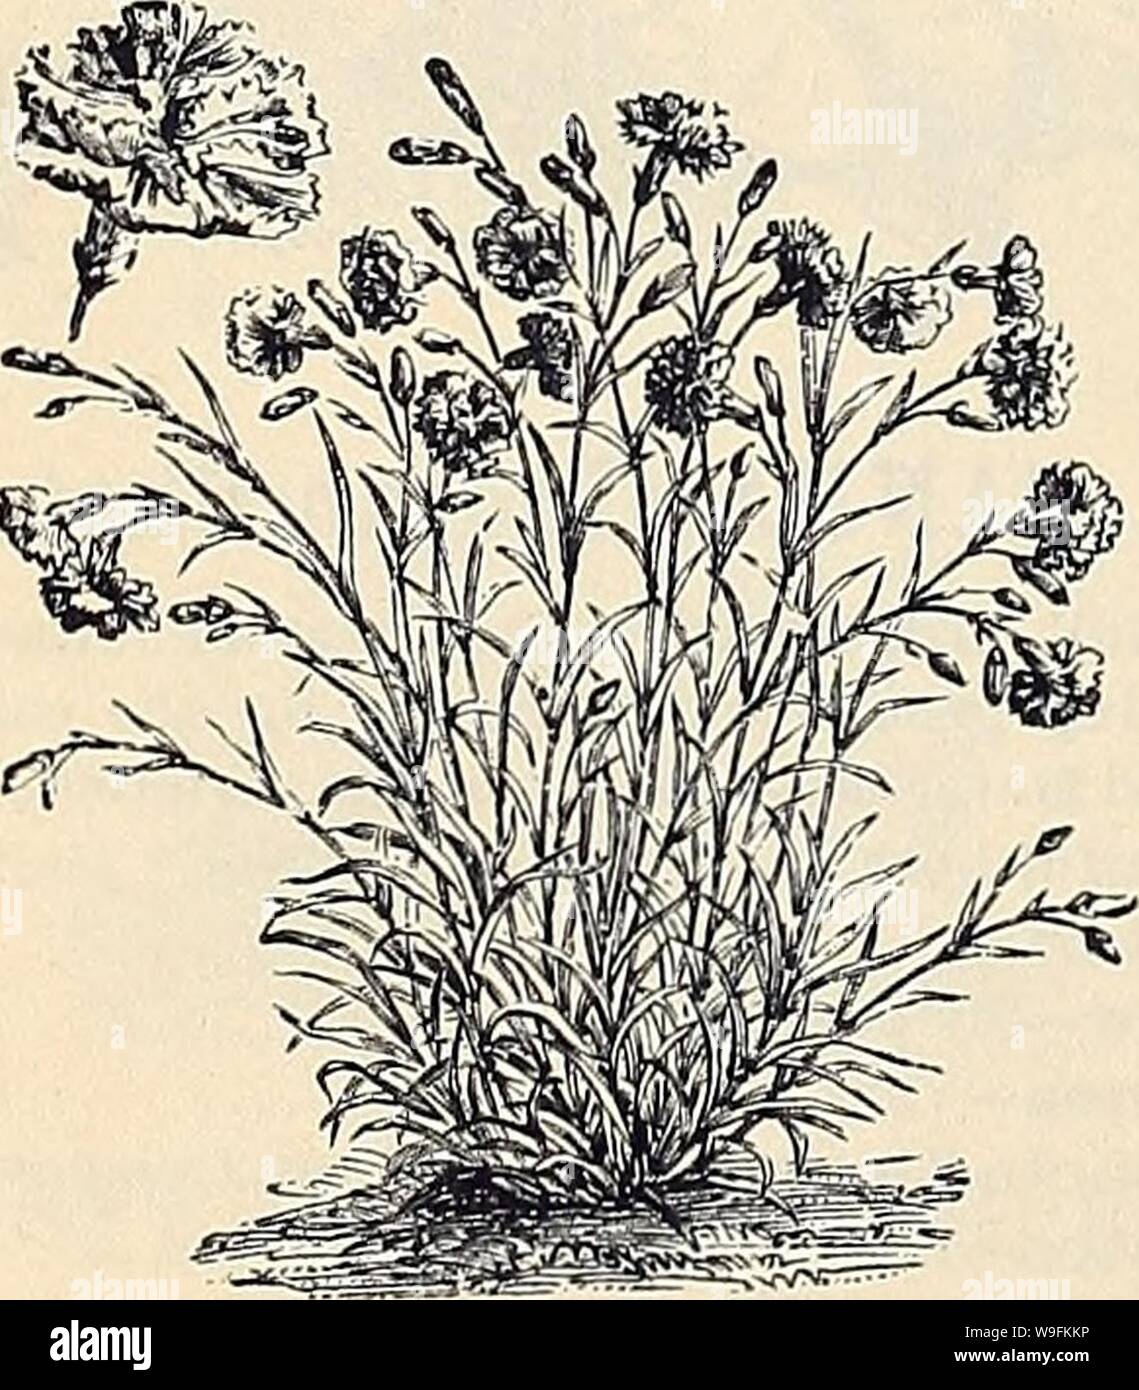 Archive image from page 51 of Currie Bros' horticultural guide . Currie Bros.' horticultural guide : spring 1888  curriebroshortic1888curr Year: 1888 ( CANDYTUFT-Iberis. One of the most popular hardy annuals; it is of the easiest culture, and grown for a variety of pur- poses almost all the year around. Darlc Purple 5 Dunnett's Extra Crimson b Fragrant—Pure white, pinnated foliage Lilac—Dwarf, very compact 5 New Carmine—True to color 5 Rocket—Pure white, in large trusses 5 Rose—Rosy lilac 5 Tom Thumb—New Dwarf white 5 White—Very delicate... 5 Pine Mixed 5 Si-    CARNATION. An important and bea Stock Photo